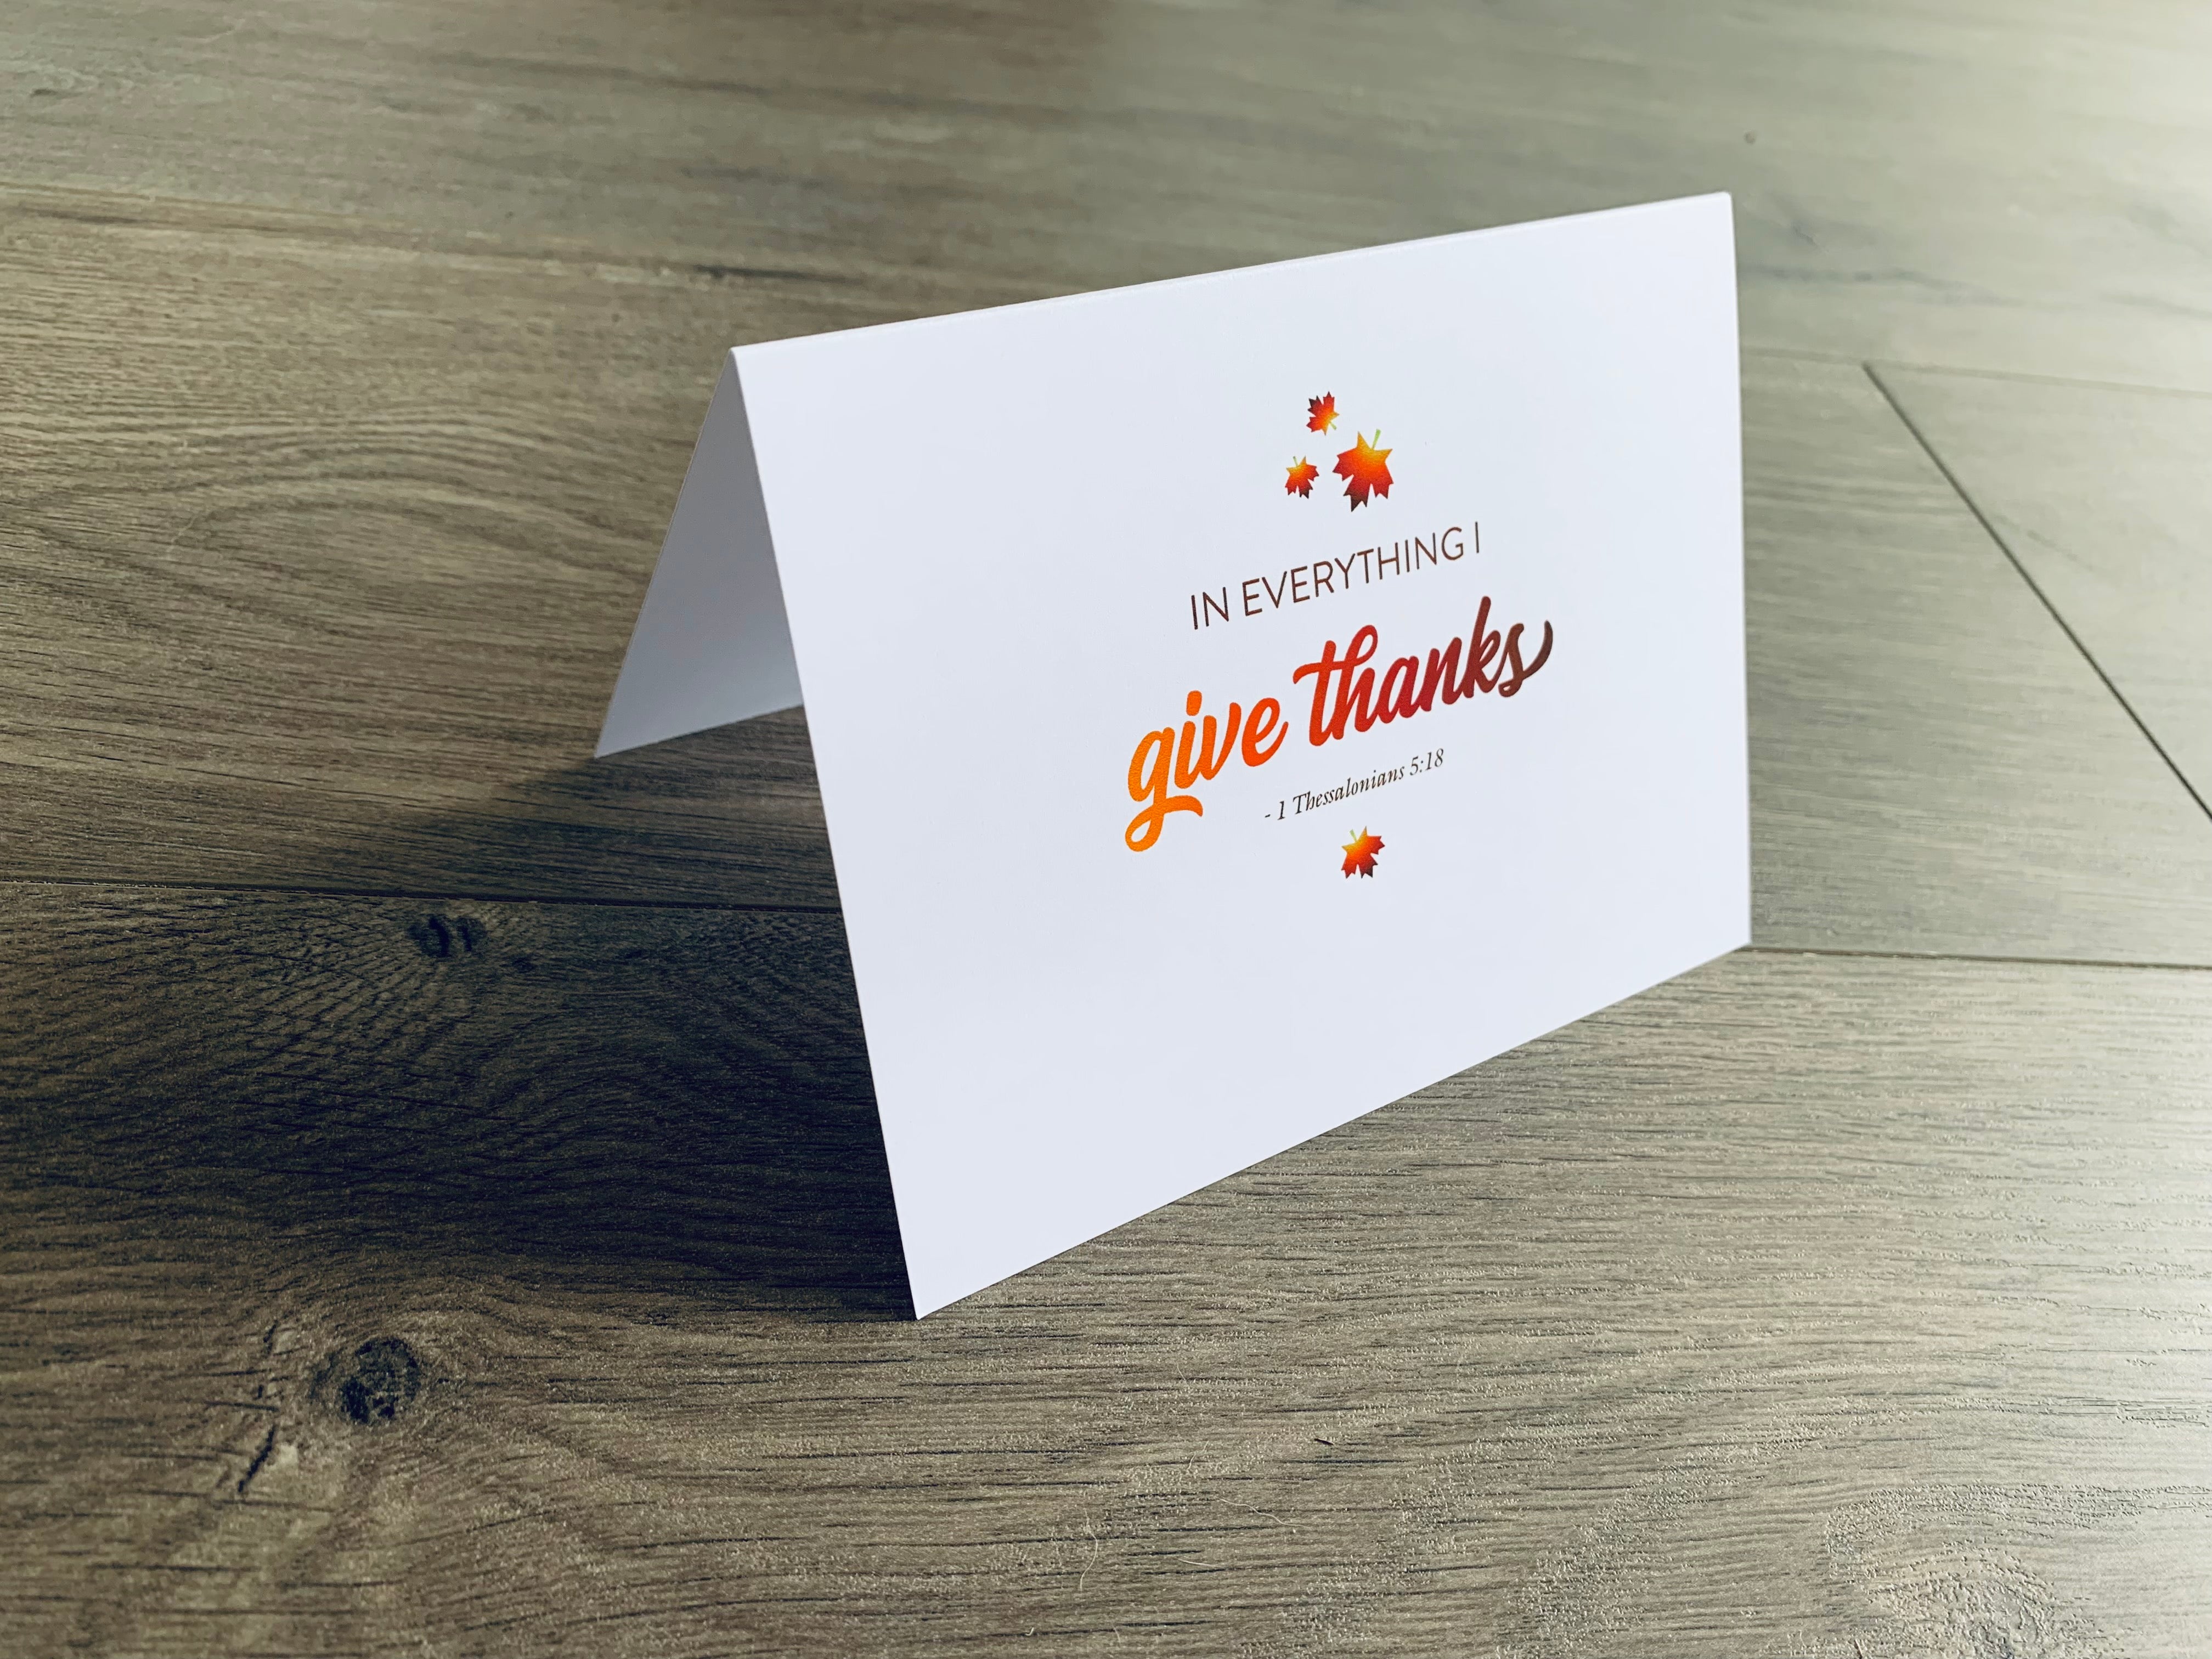 A white folded notecard is propped up on a wooden floor. The card says, "In everything, I give thanks" with small leaves around it. From the Giving Thanks Collection by Stationare.